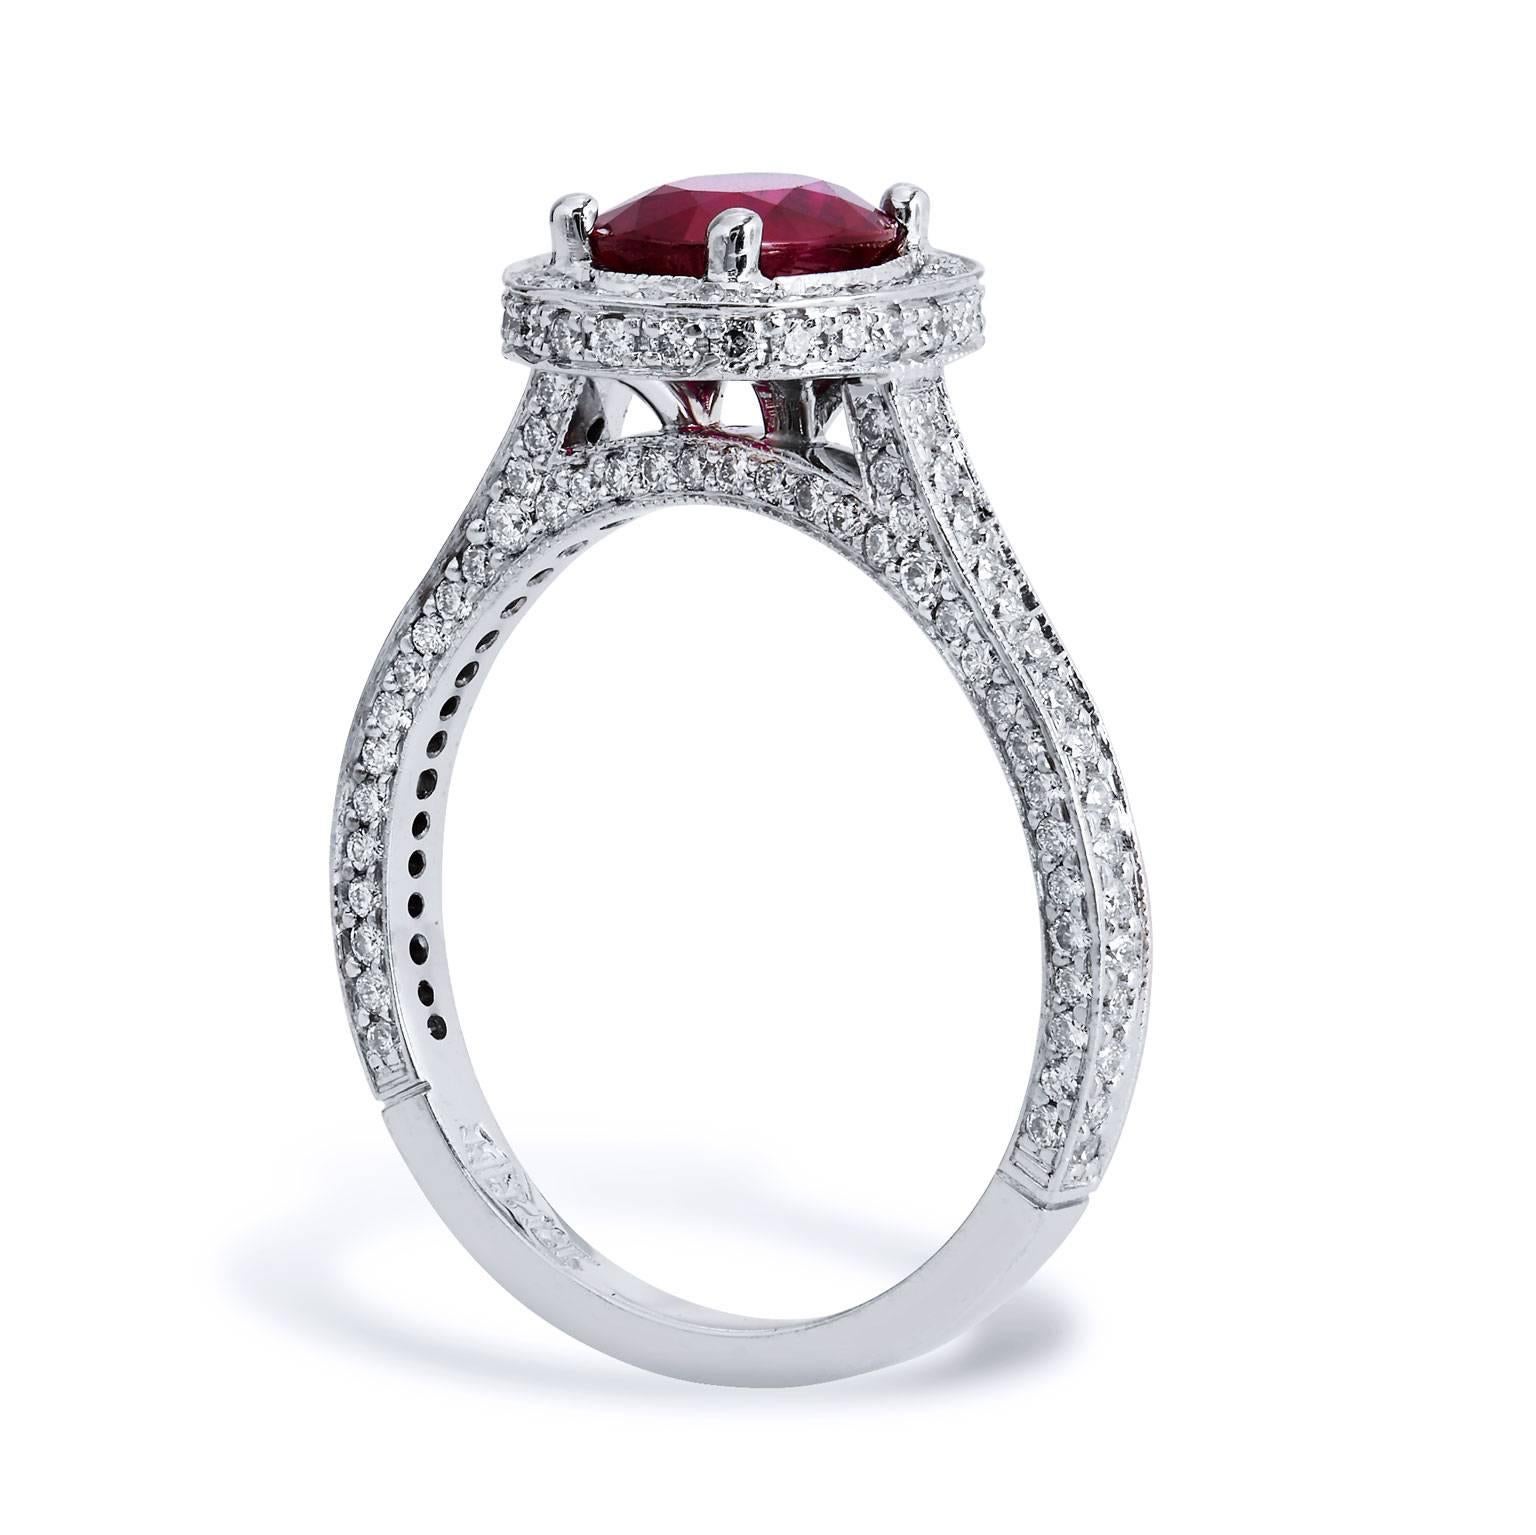 Enjoy this previously loved 18 karat white gold fashion ring featuring a 1.38 carat oval Burma  Ruby set at center (GIA #6157644841) 0.82 carat of pave set diamond encircle the ruby and cascade down the shank.

